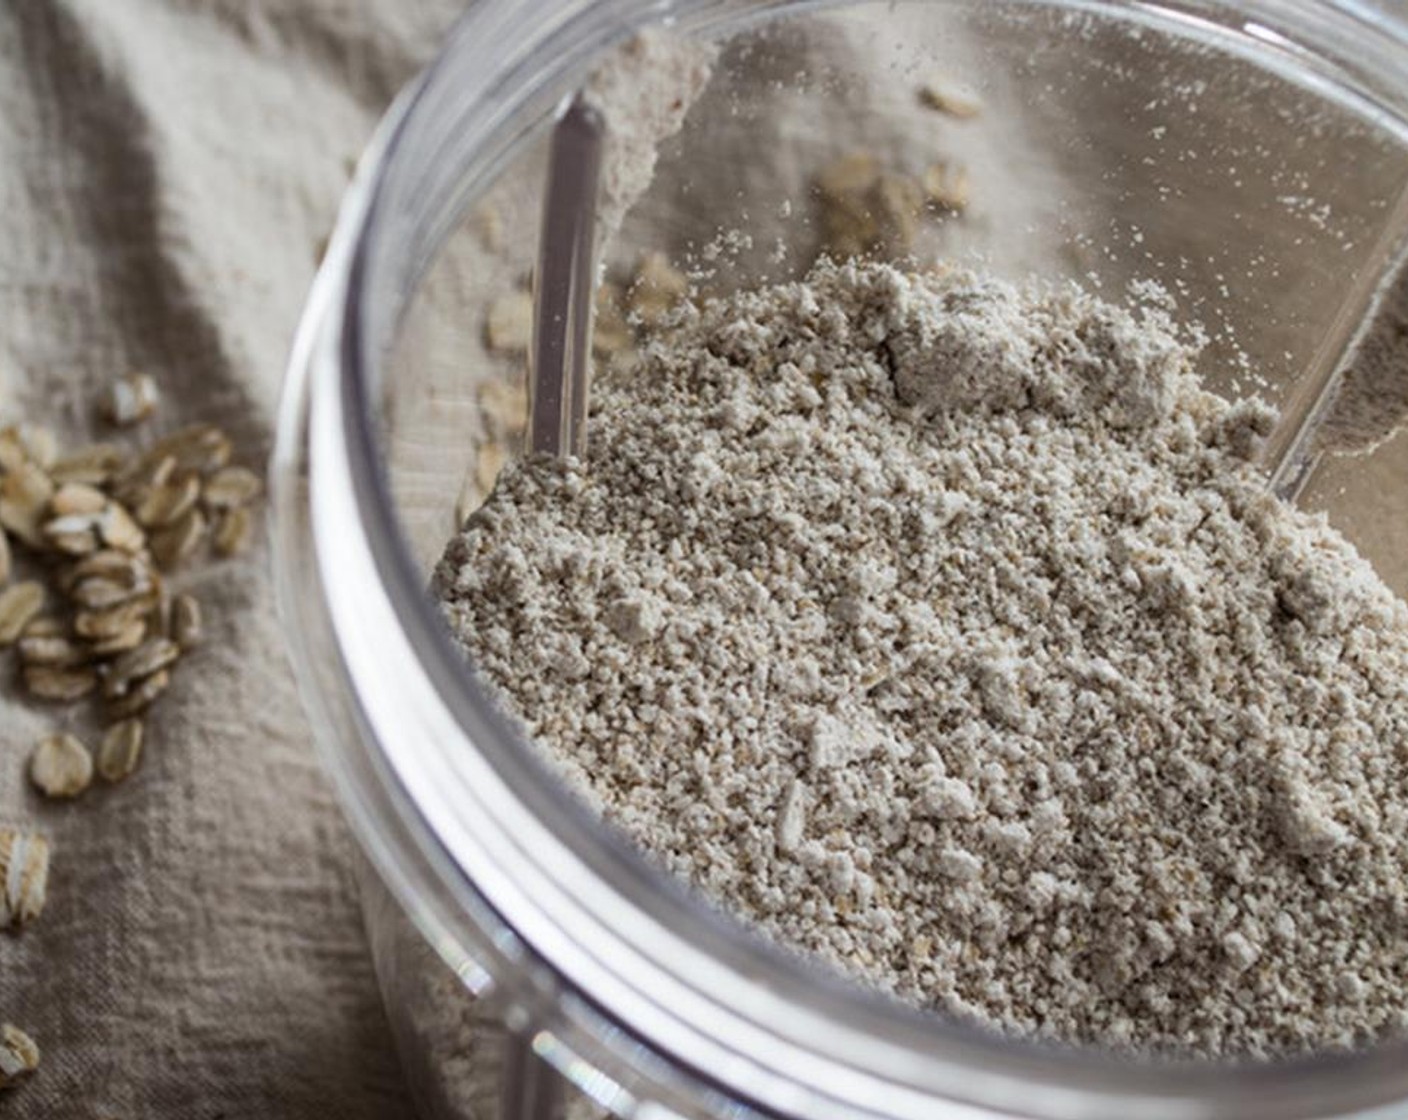 step 3 Add Oats (1 1/4 cups) to NutriBullet or food processor and blend 8-10 seconds to create a find flour-like consistency. Repeat with the Cashew Meal (1/4 cup) but only for 5-6 seconds.